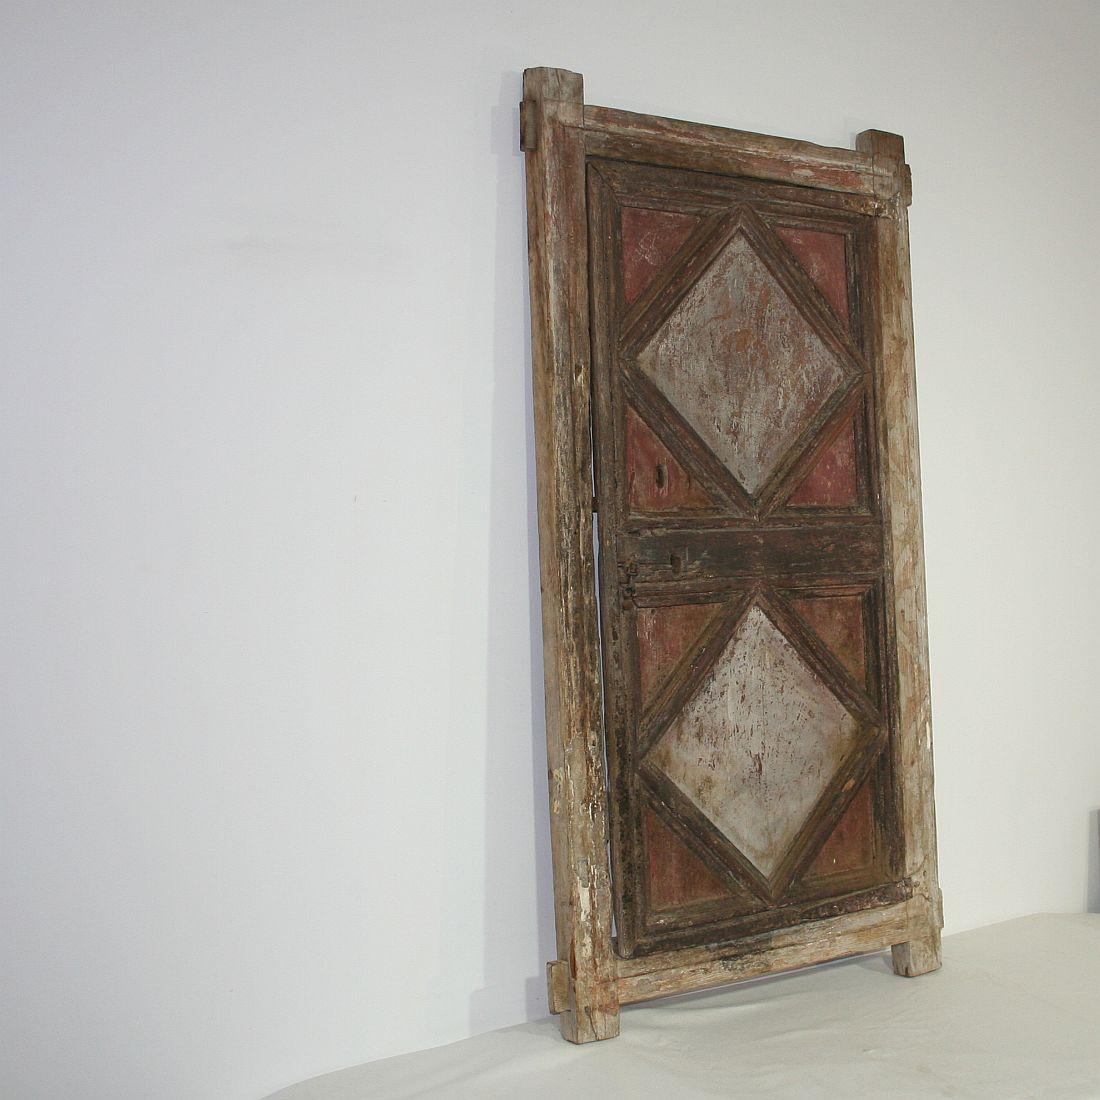 Beautiful Spanish cupboard door with traces of its original color. Great decorative statement in a room.
Spain, circa 1750. Weathered. More pictures available on request.